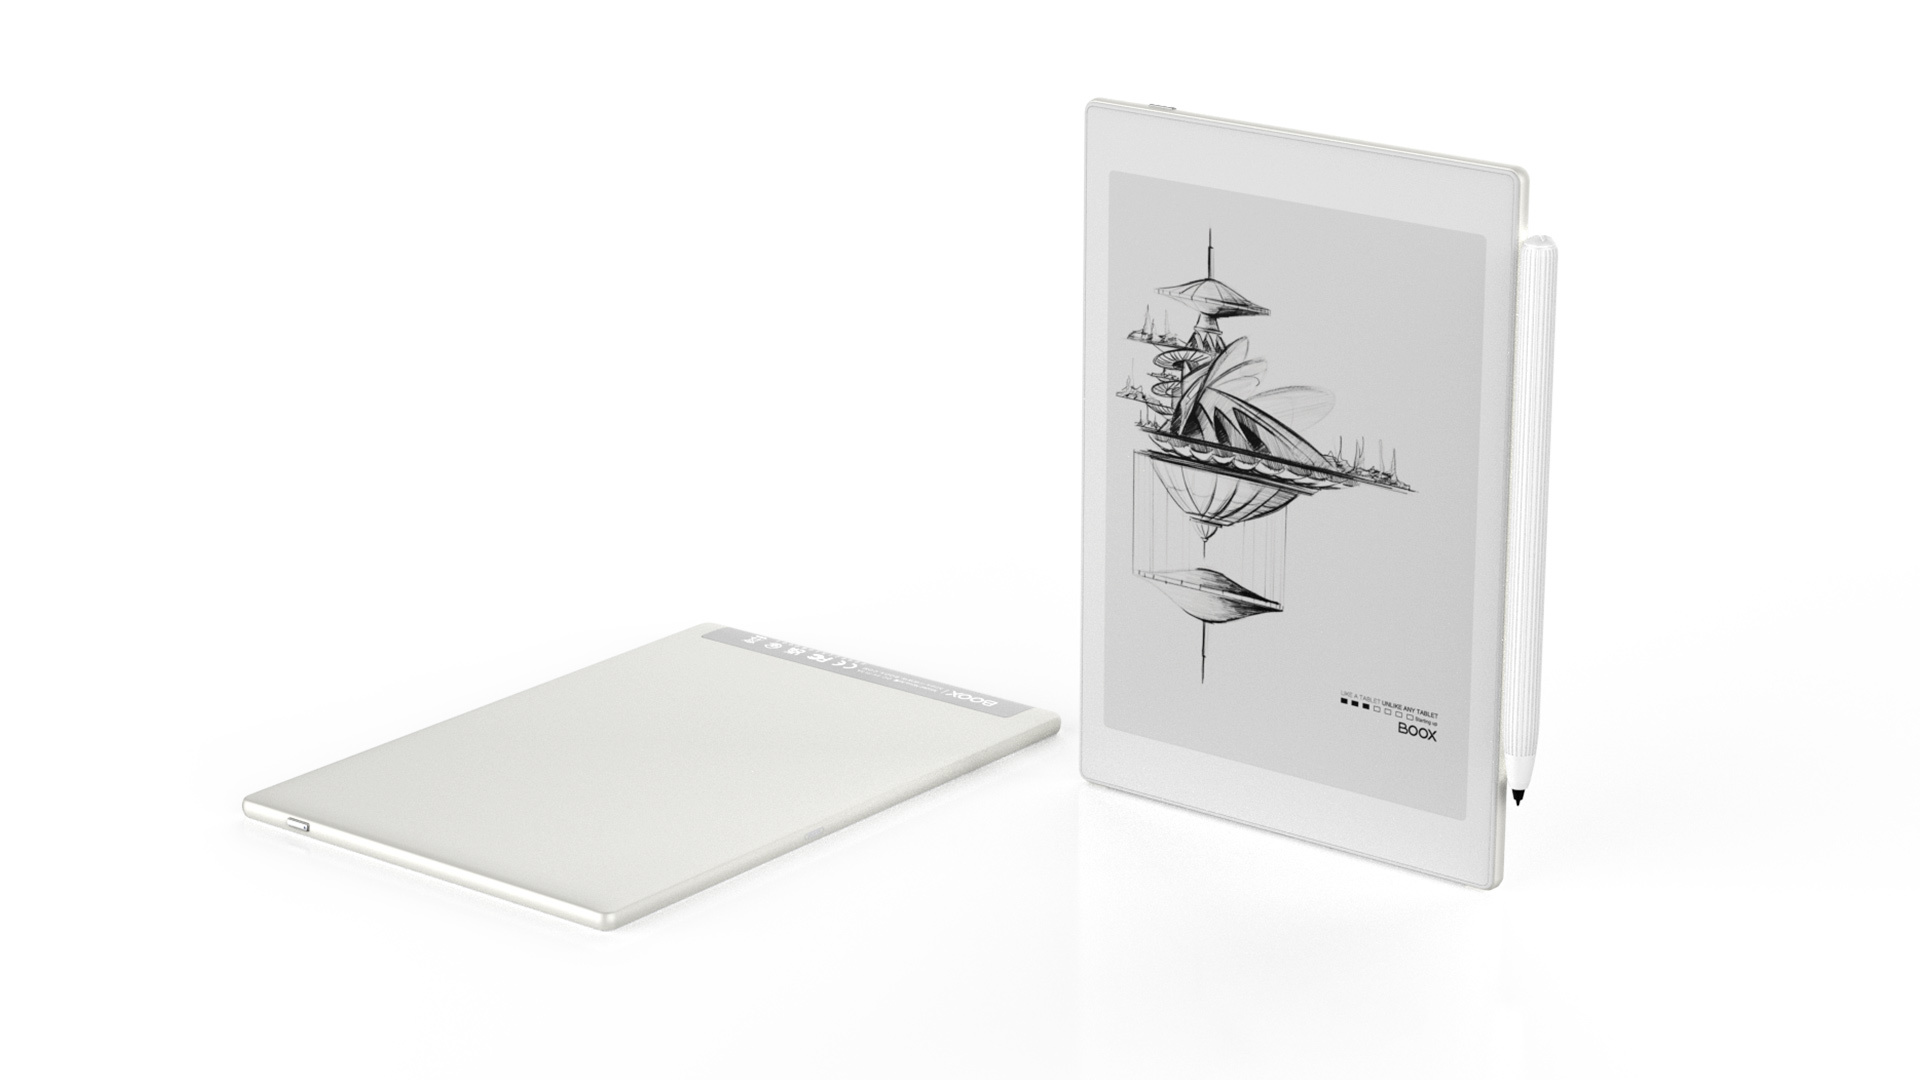 Onyx BOOX Announces Tab Ultra with a 16MP Camera and Two More E Ink Tablets